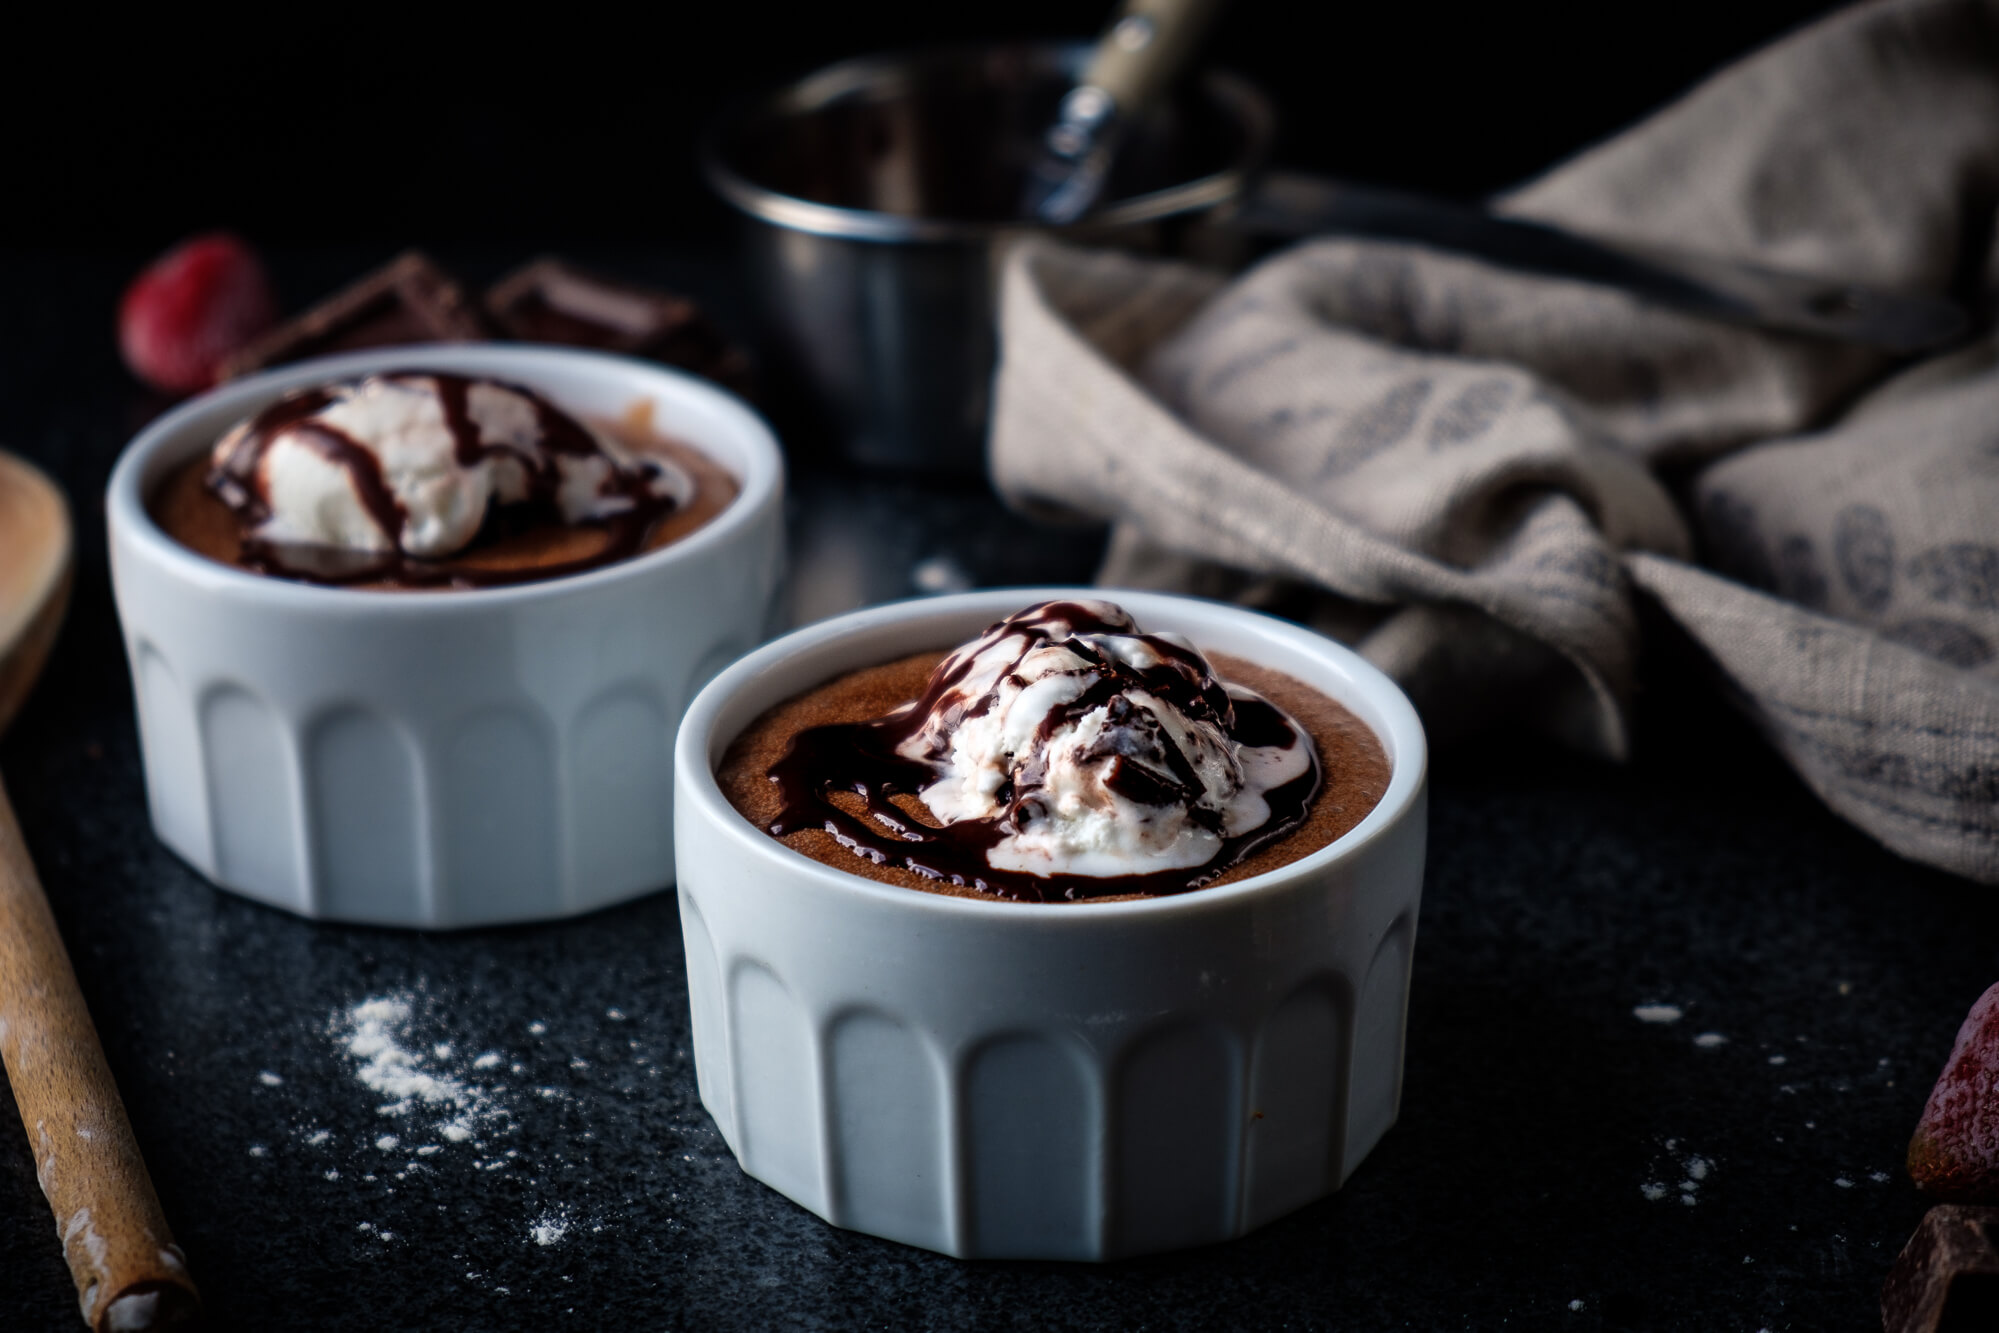 Warm Chocolate Mousse